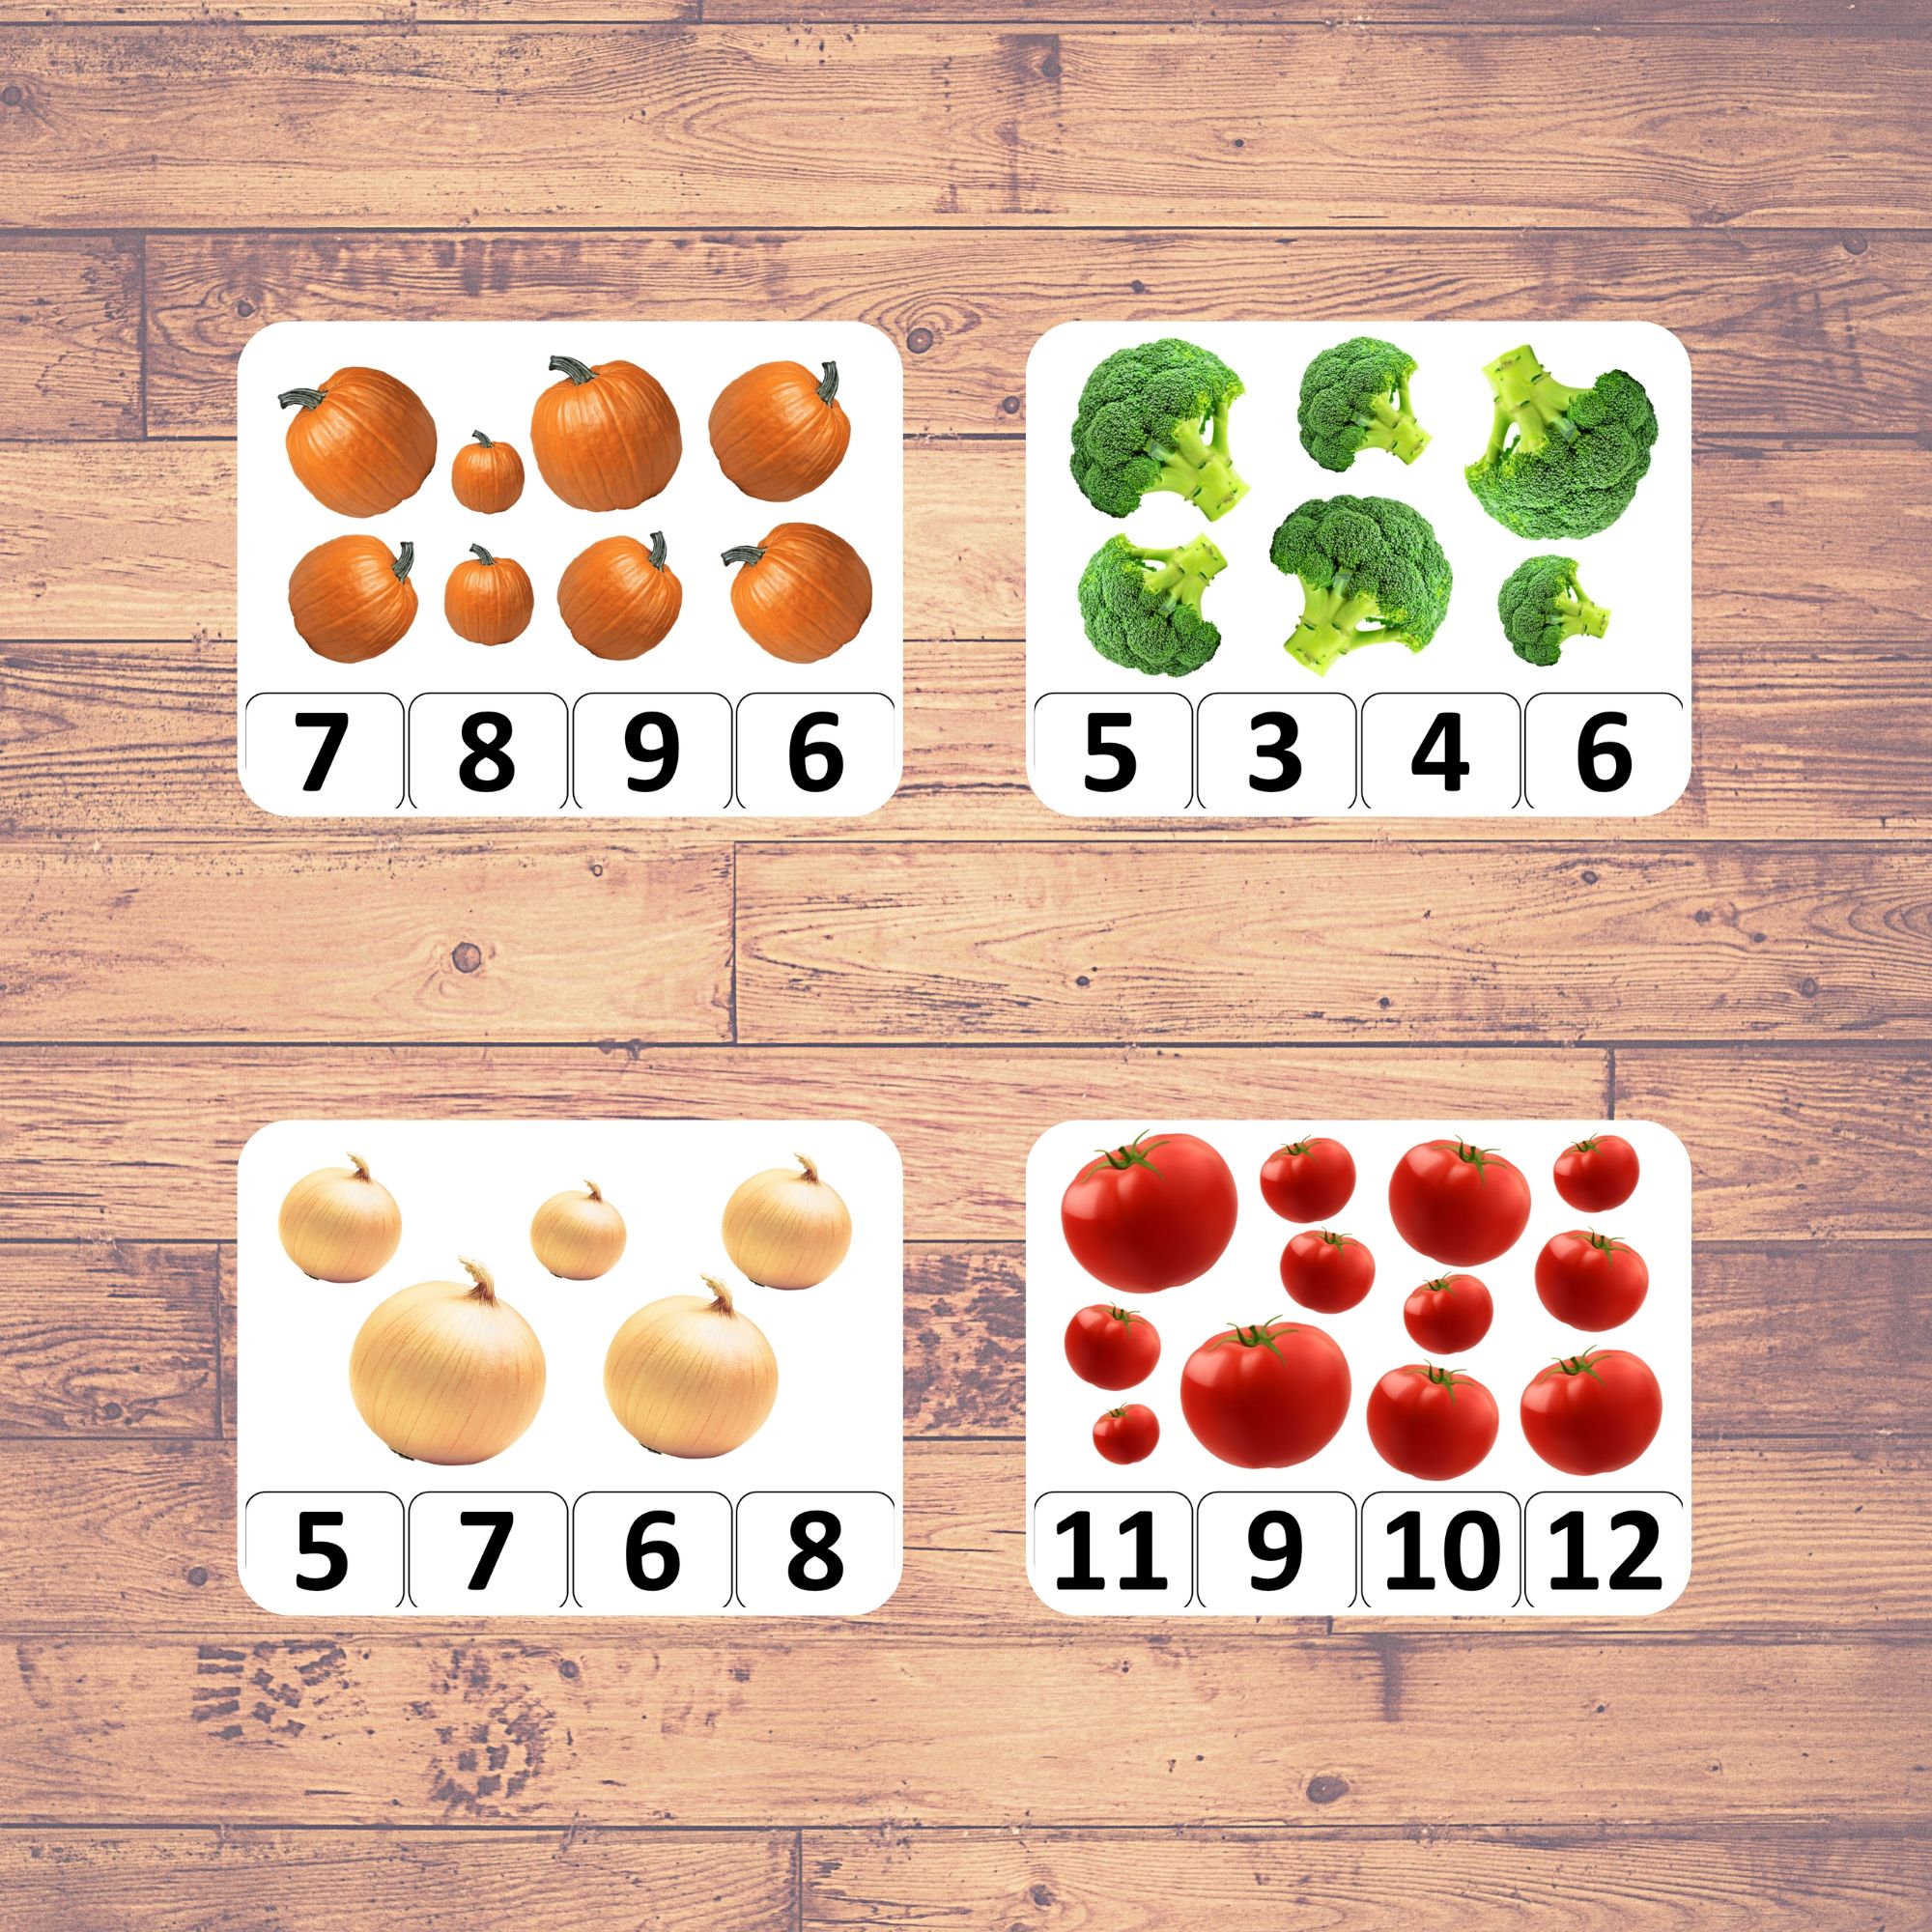 counting-vegetables-clip-counting-cards-montessori-educational